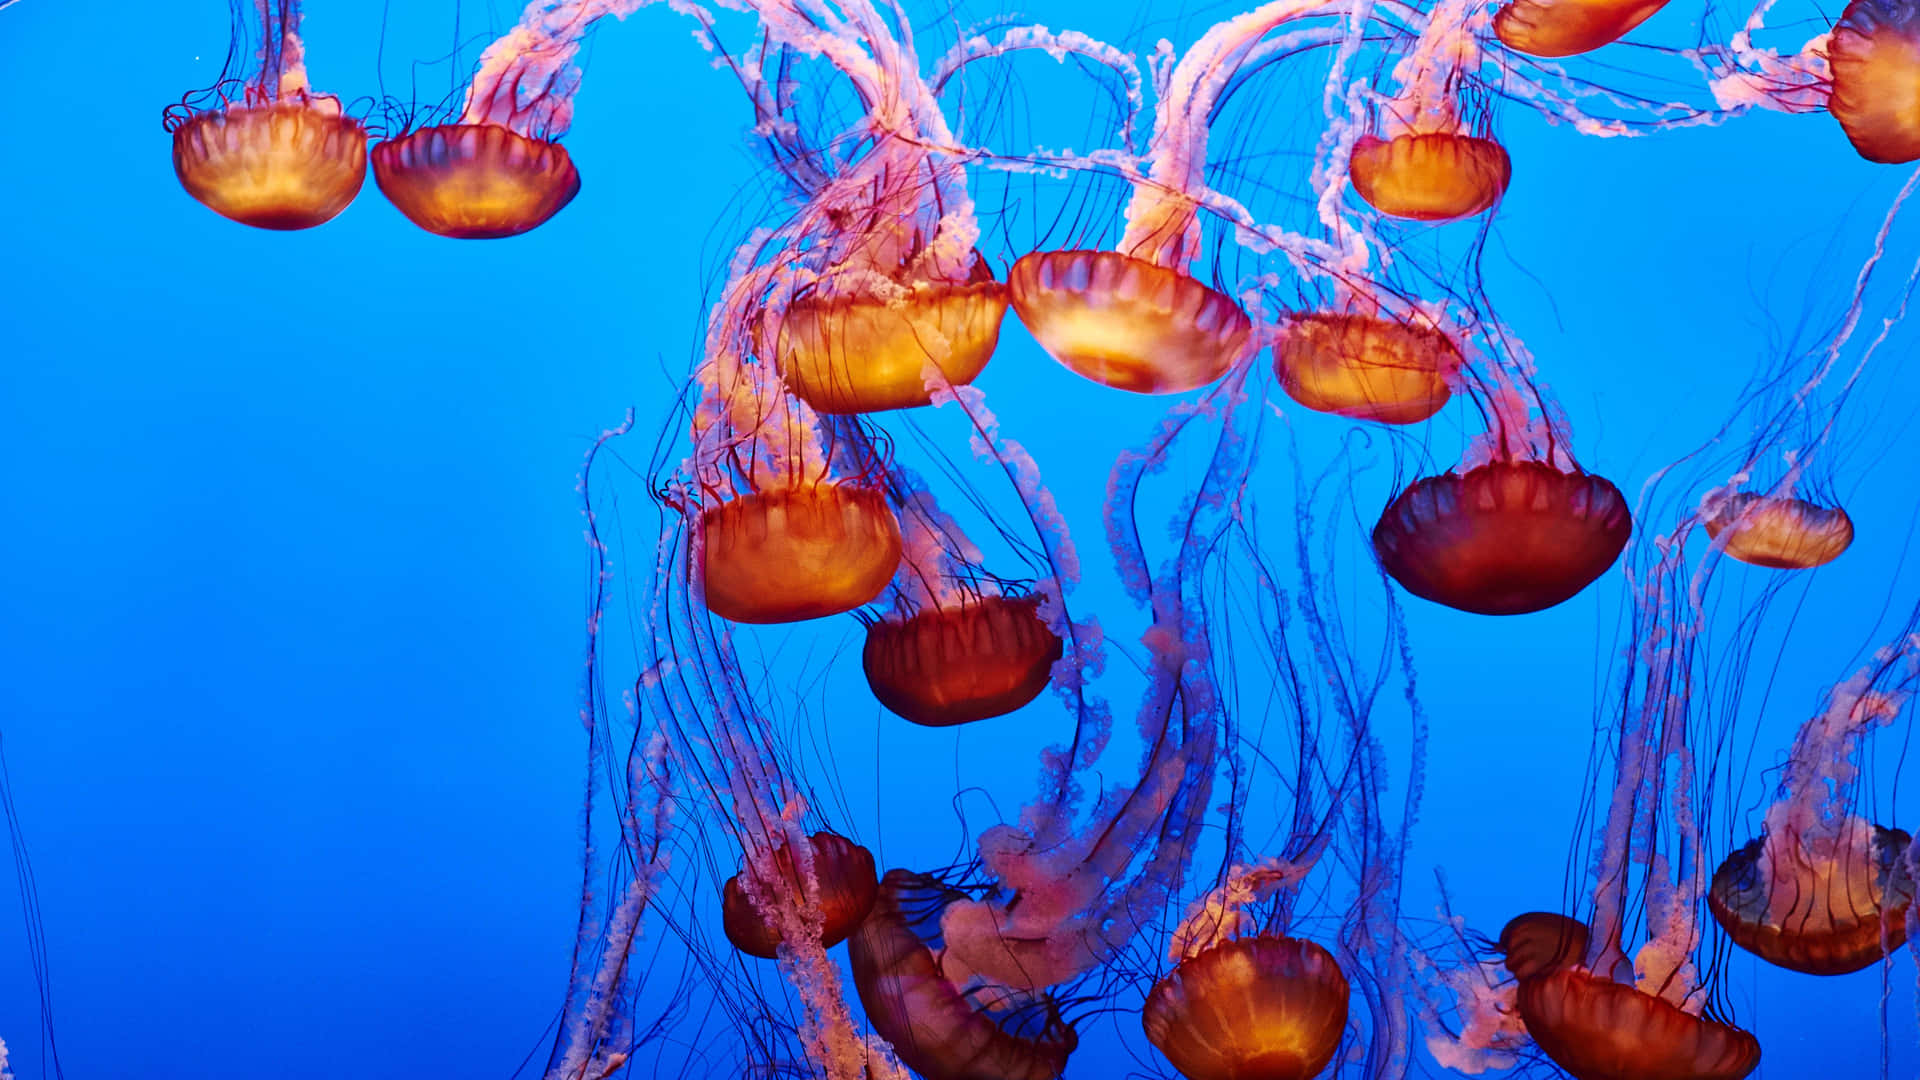 The Beauty Of Nature: 4K Jellyfish" Wallpaper